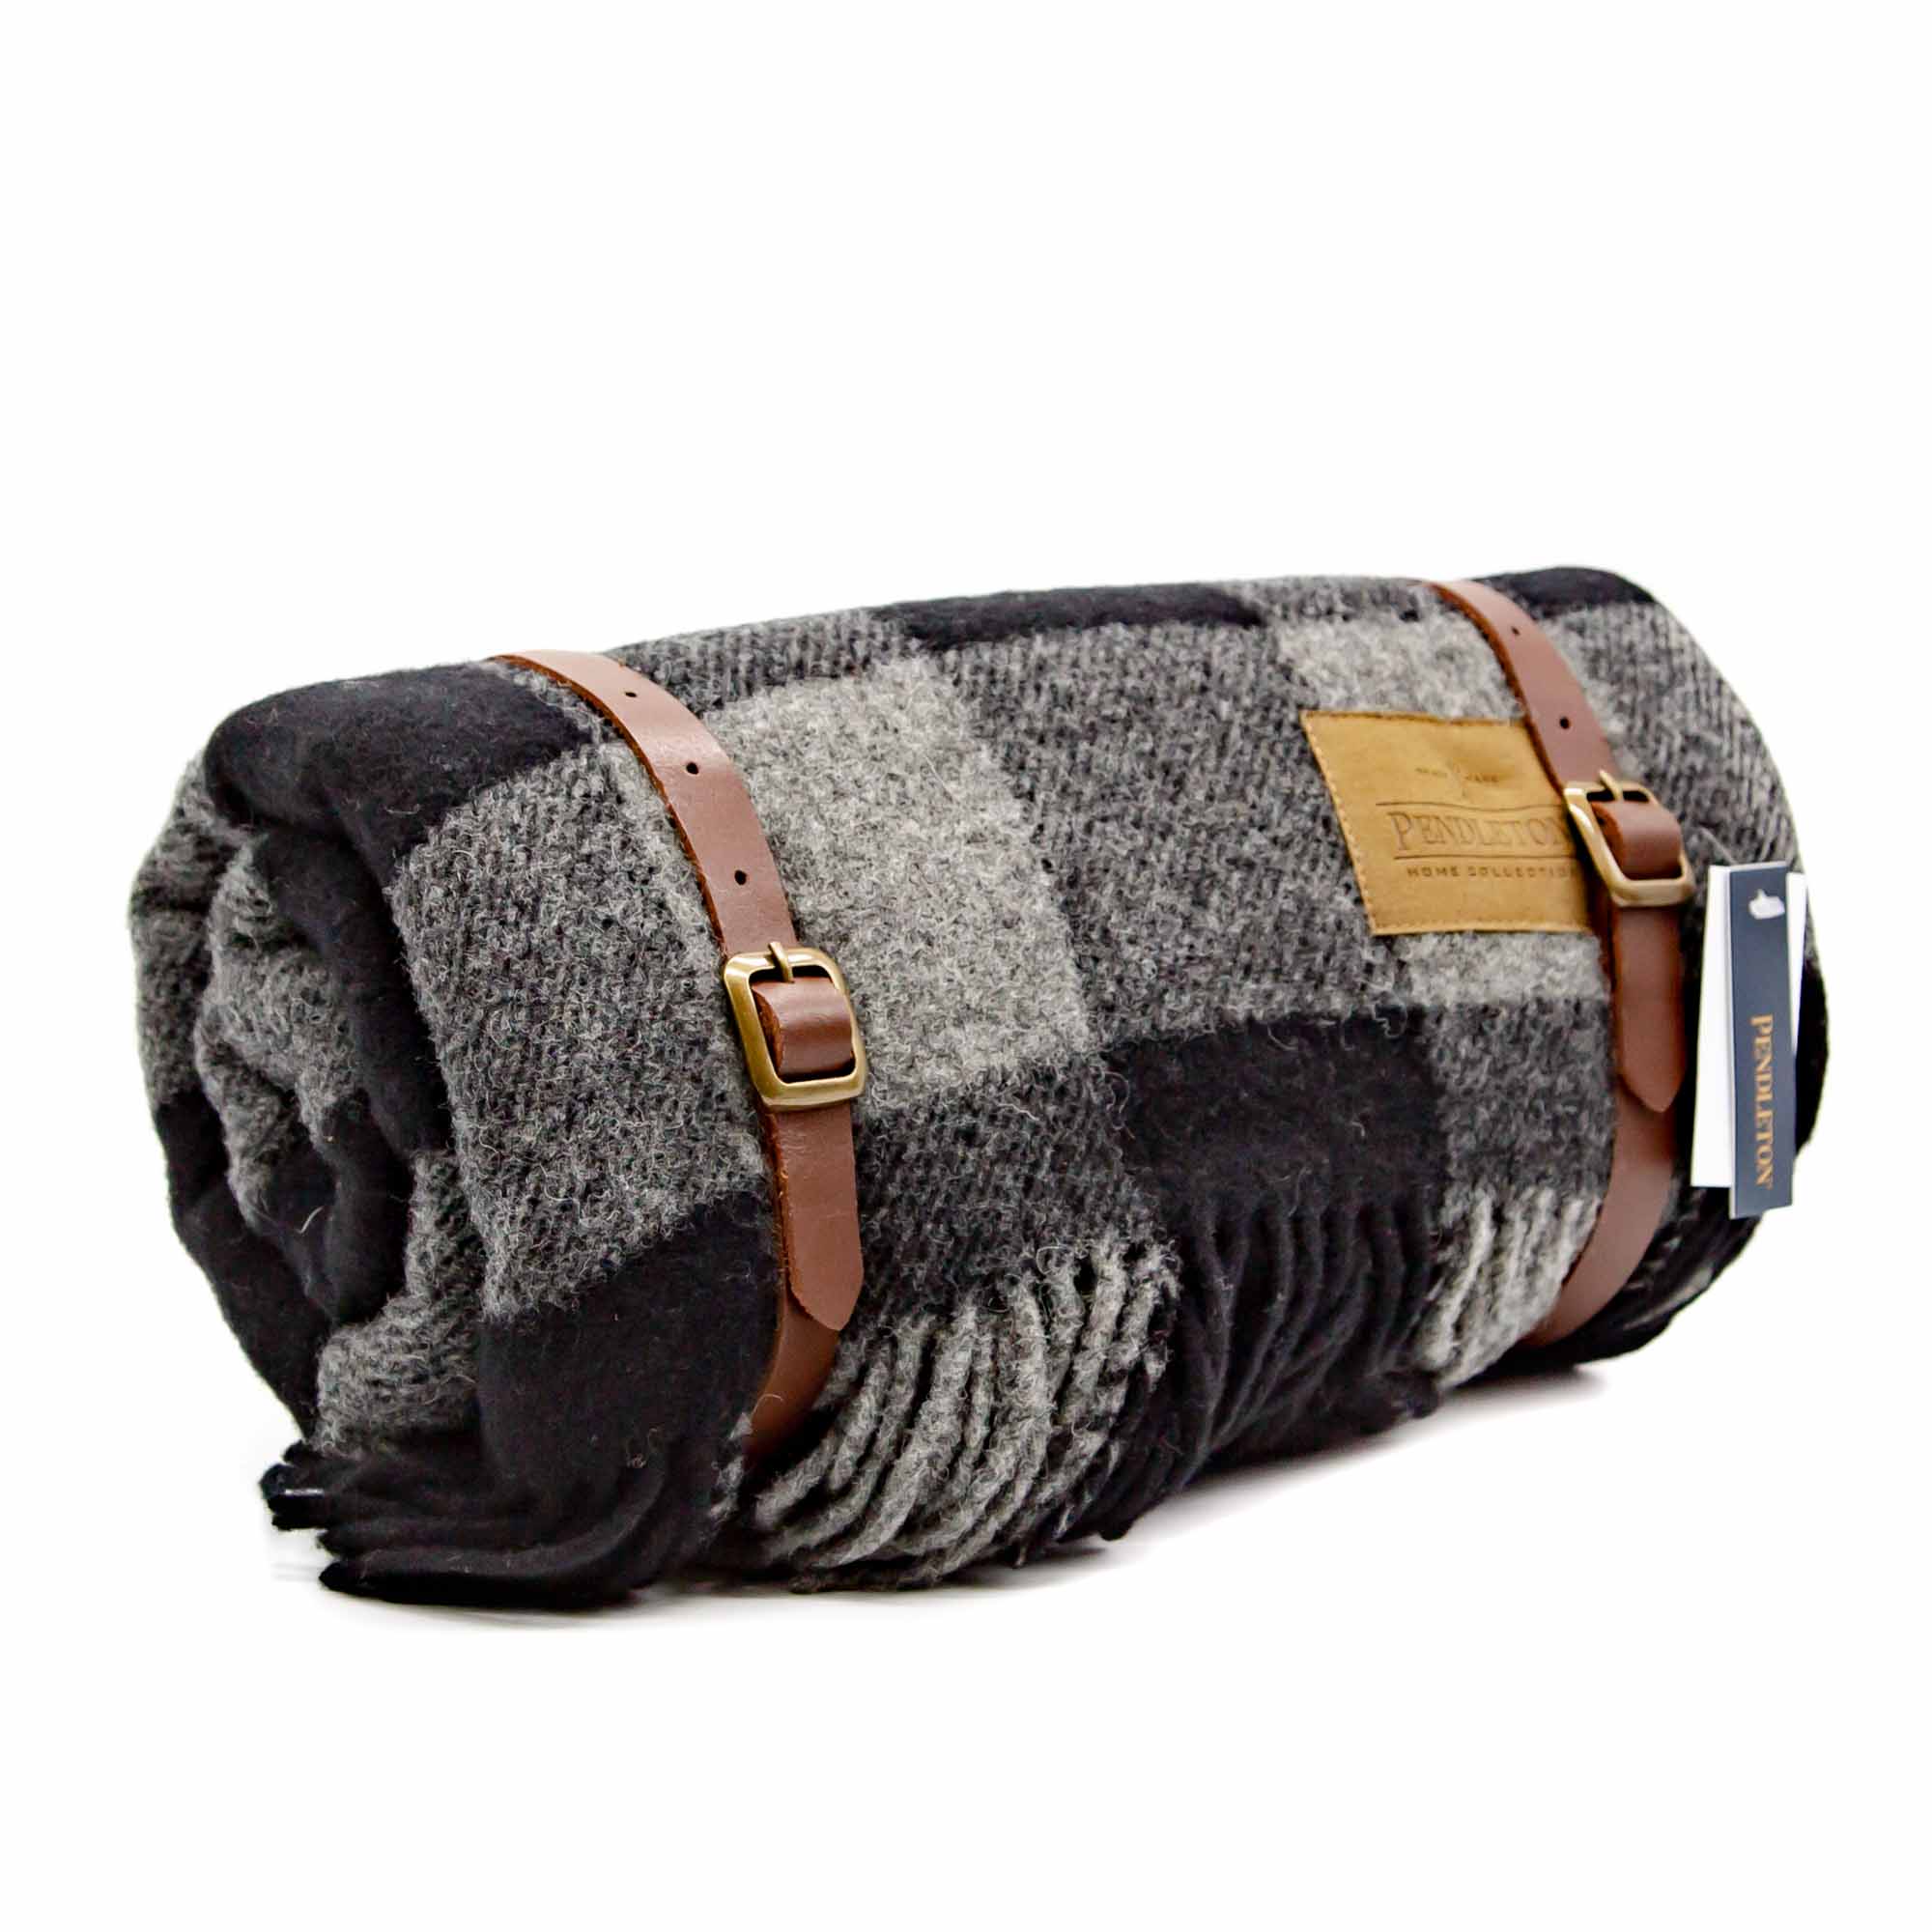 Plaid  Blanket With Leather Carrier - Mortise And Tenon